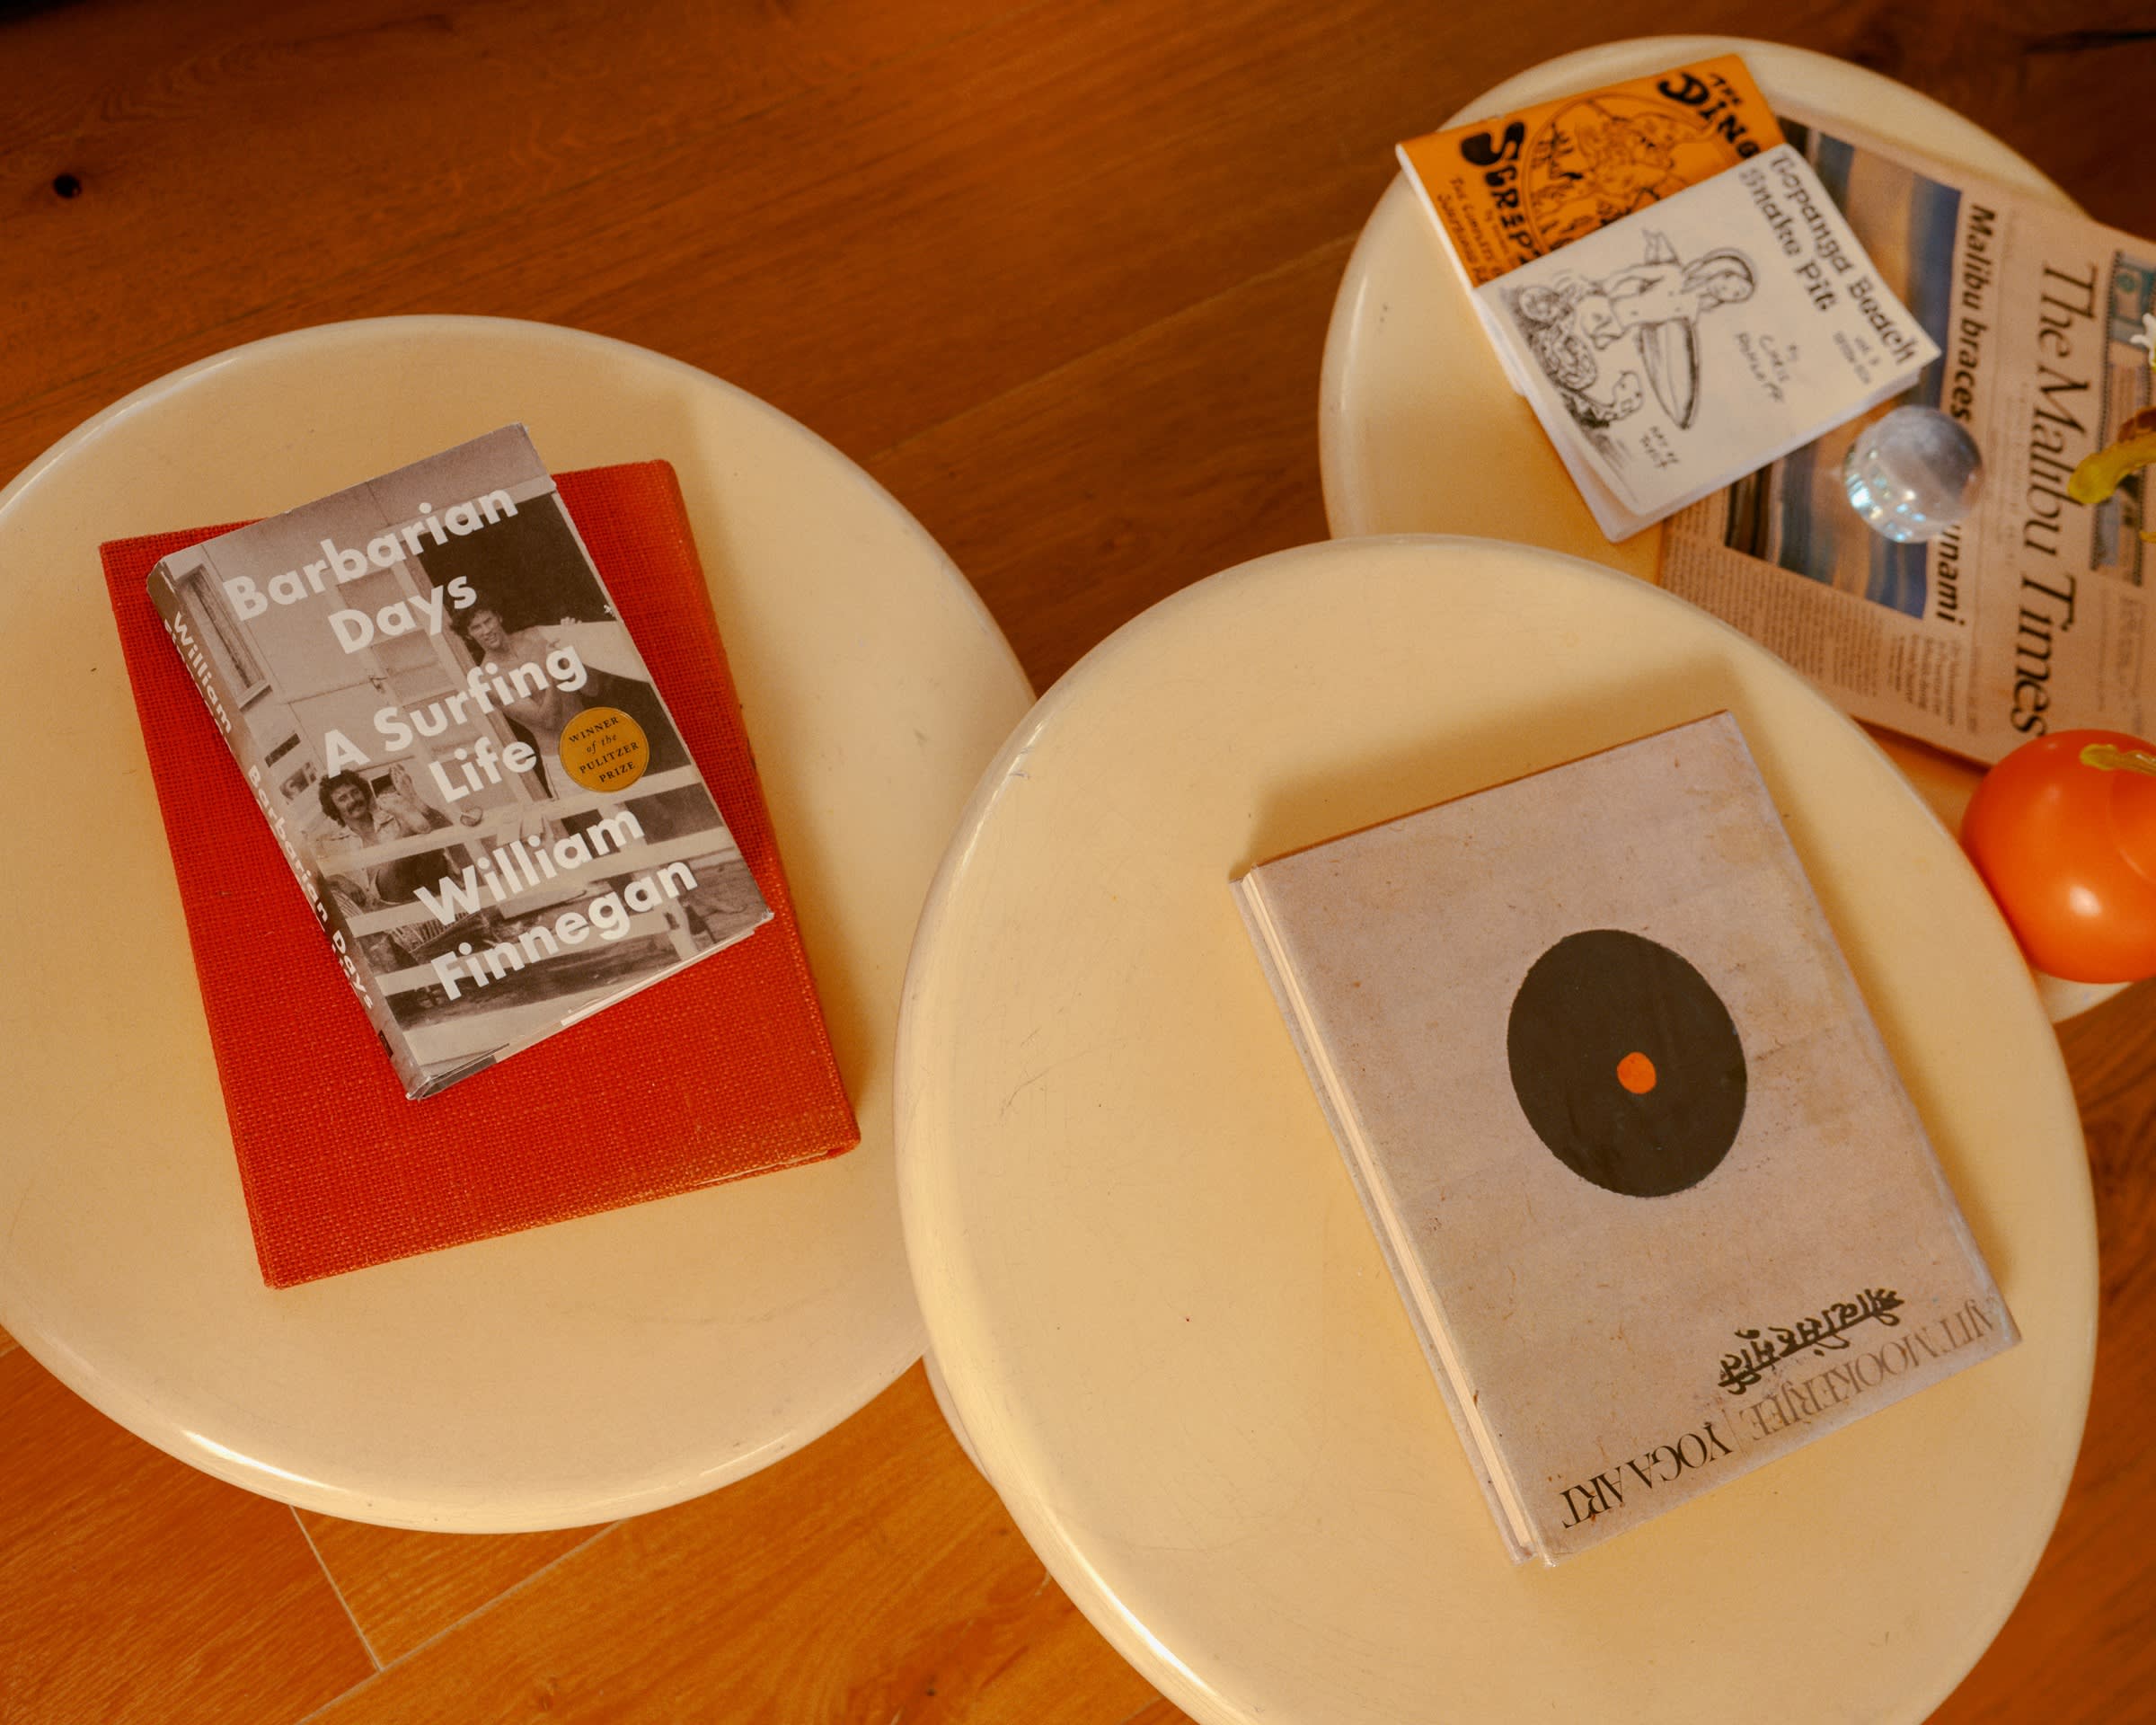 Recent reads on vintage coffee tables